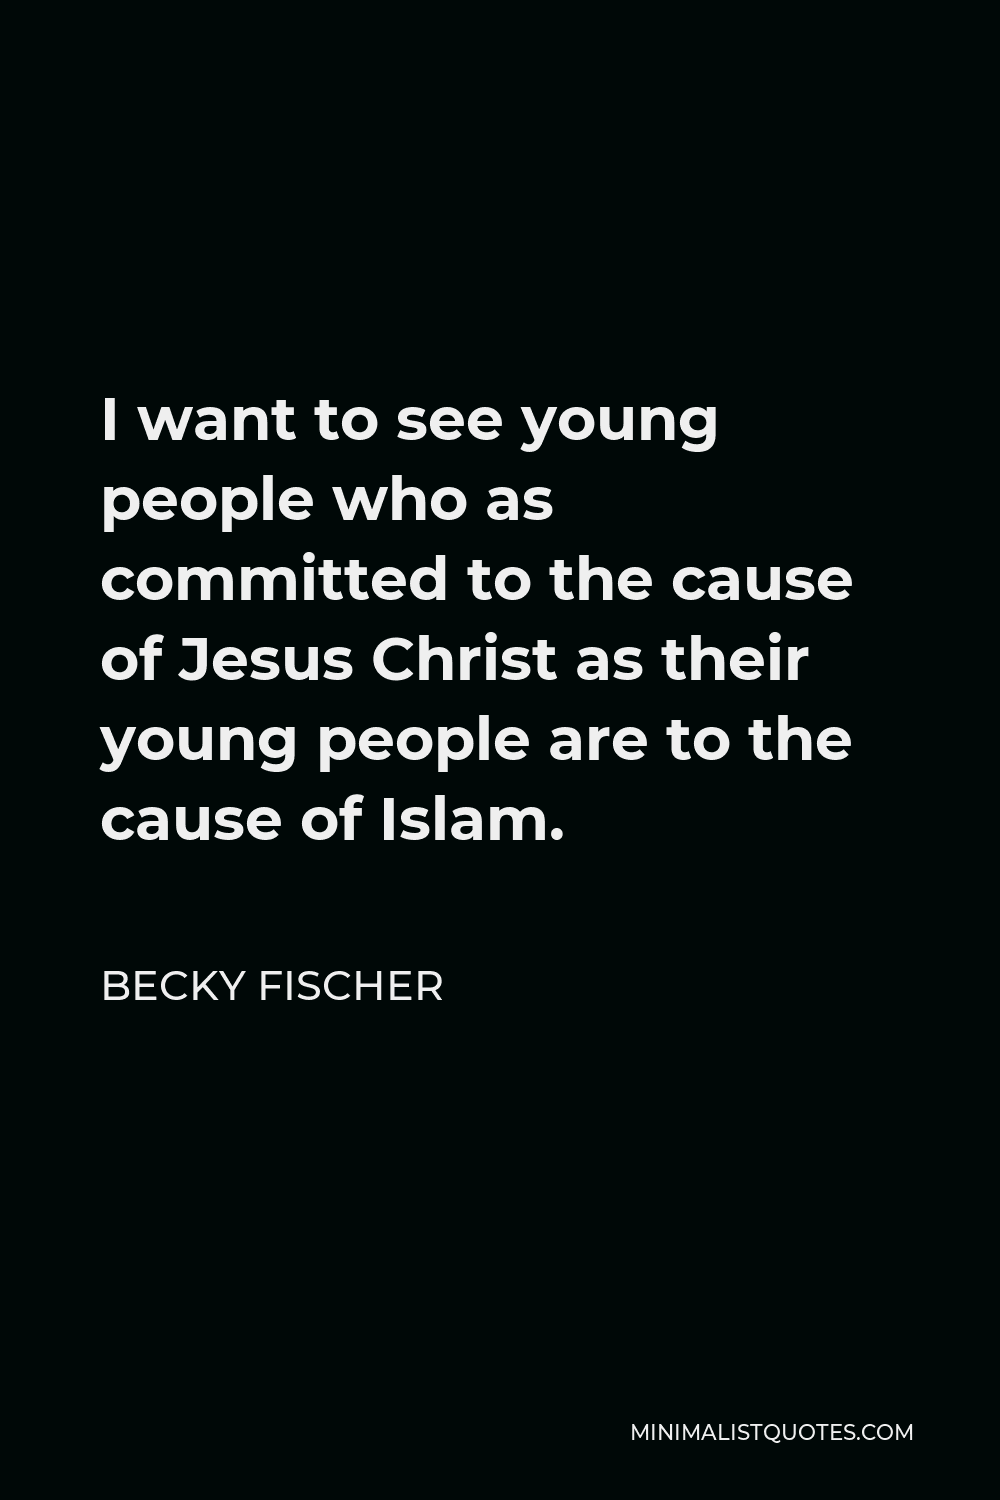 Becky Fischer Quote - I want to see young people who as committed to the cause of Jesus Christ as their young people are to the cause of Islam.